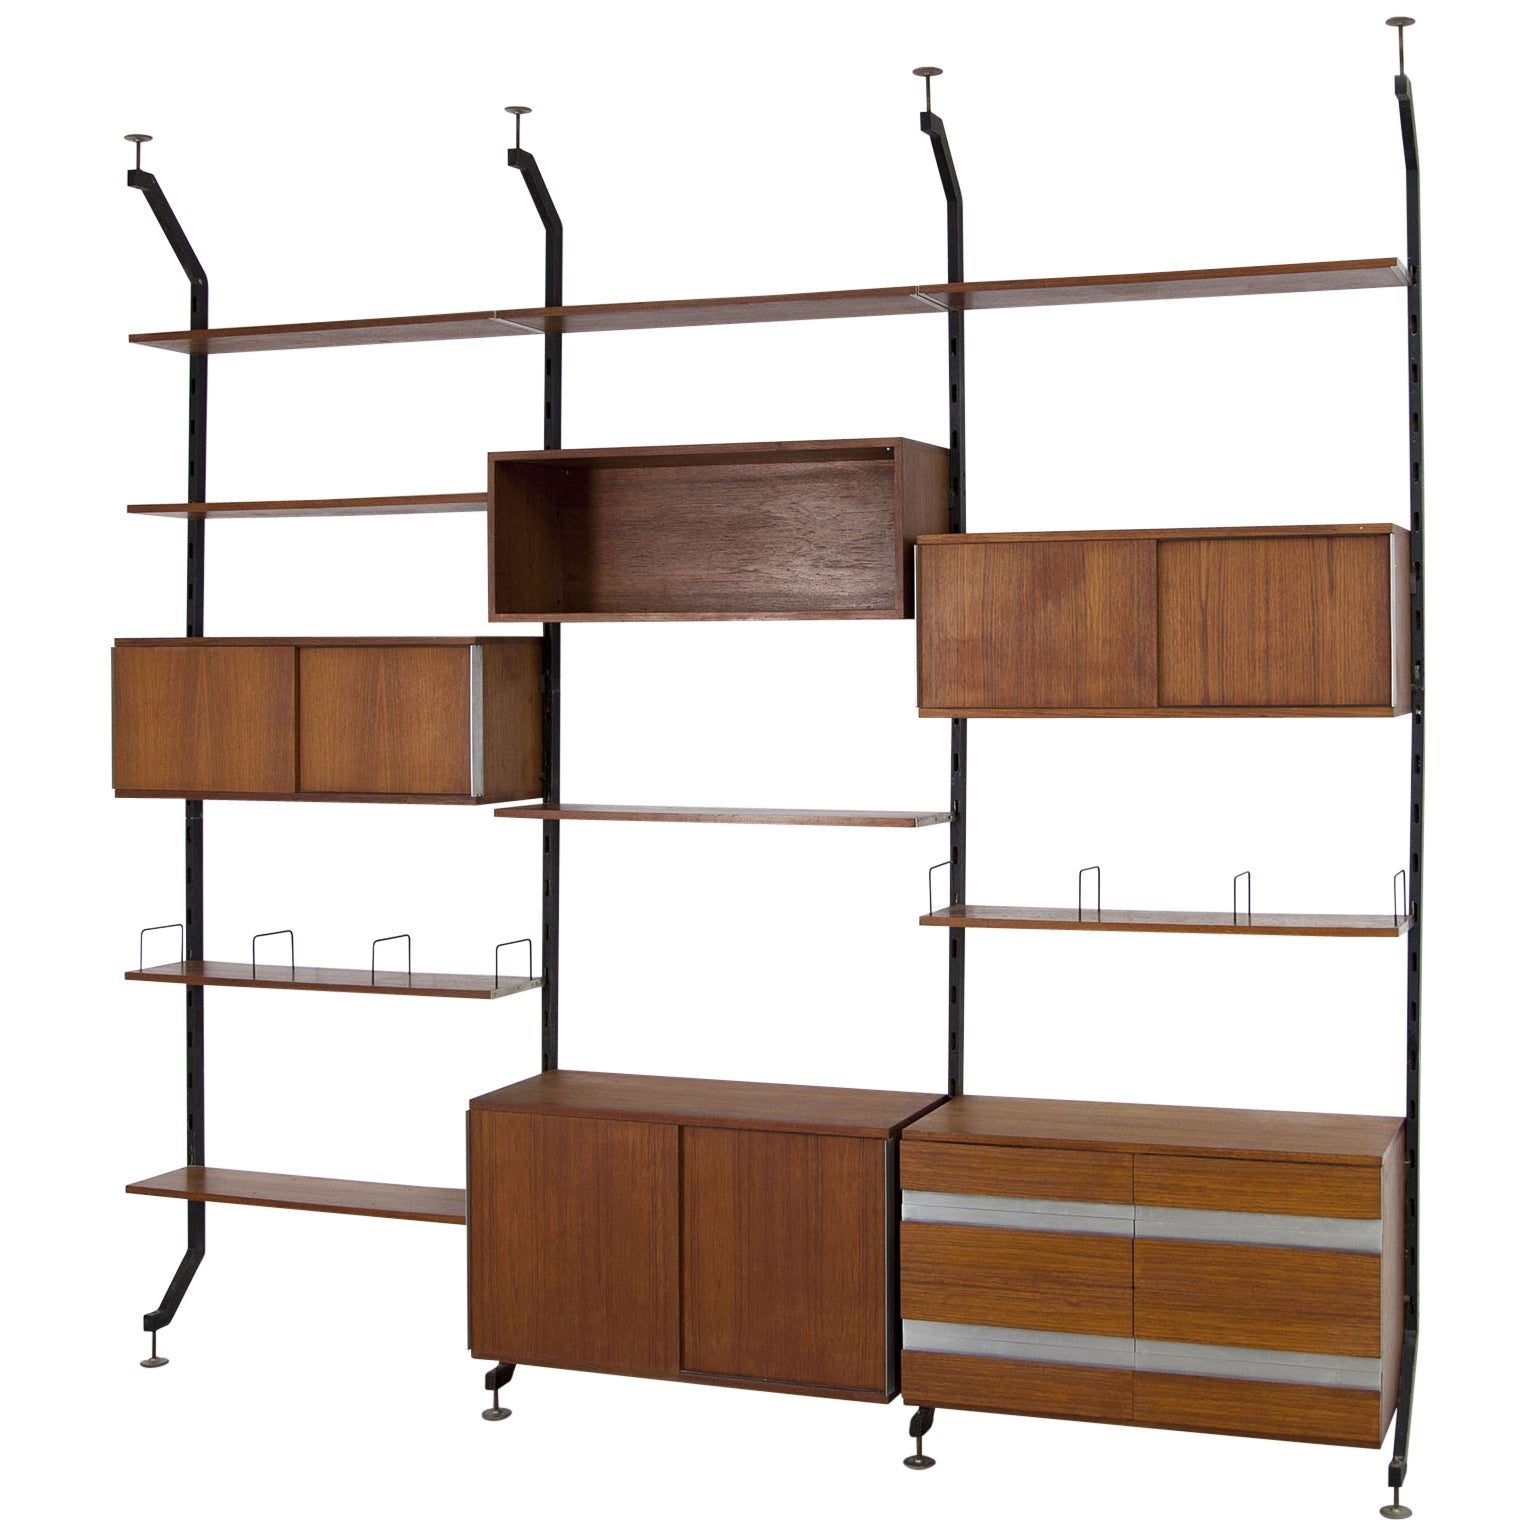 Teak Wall-Unit by Ico Parisi for Mim Roma Model Urio For Sale at 1stDibs